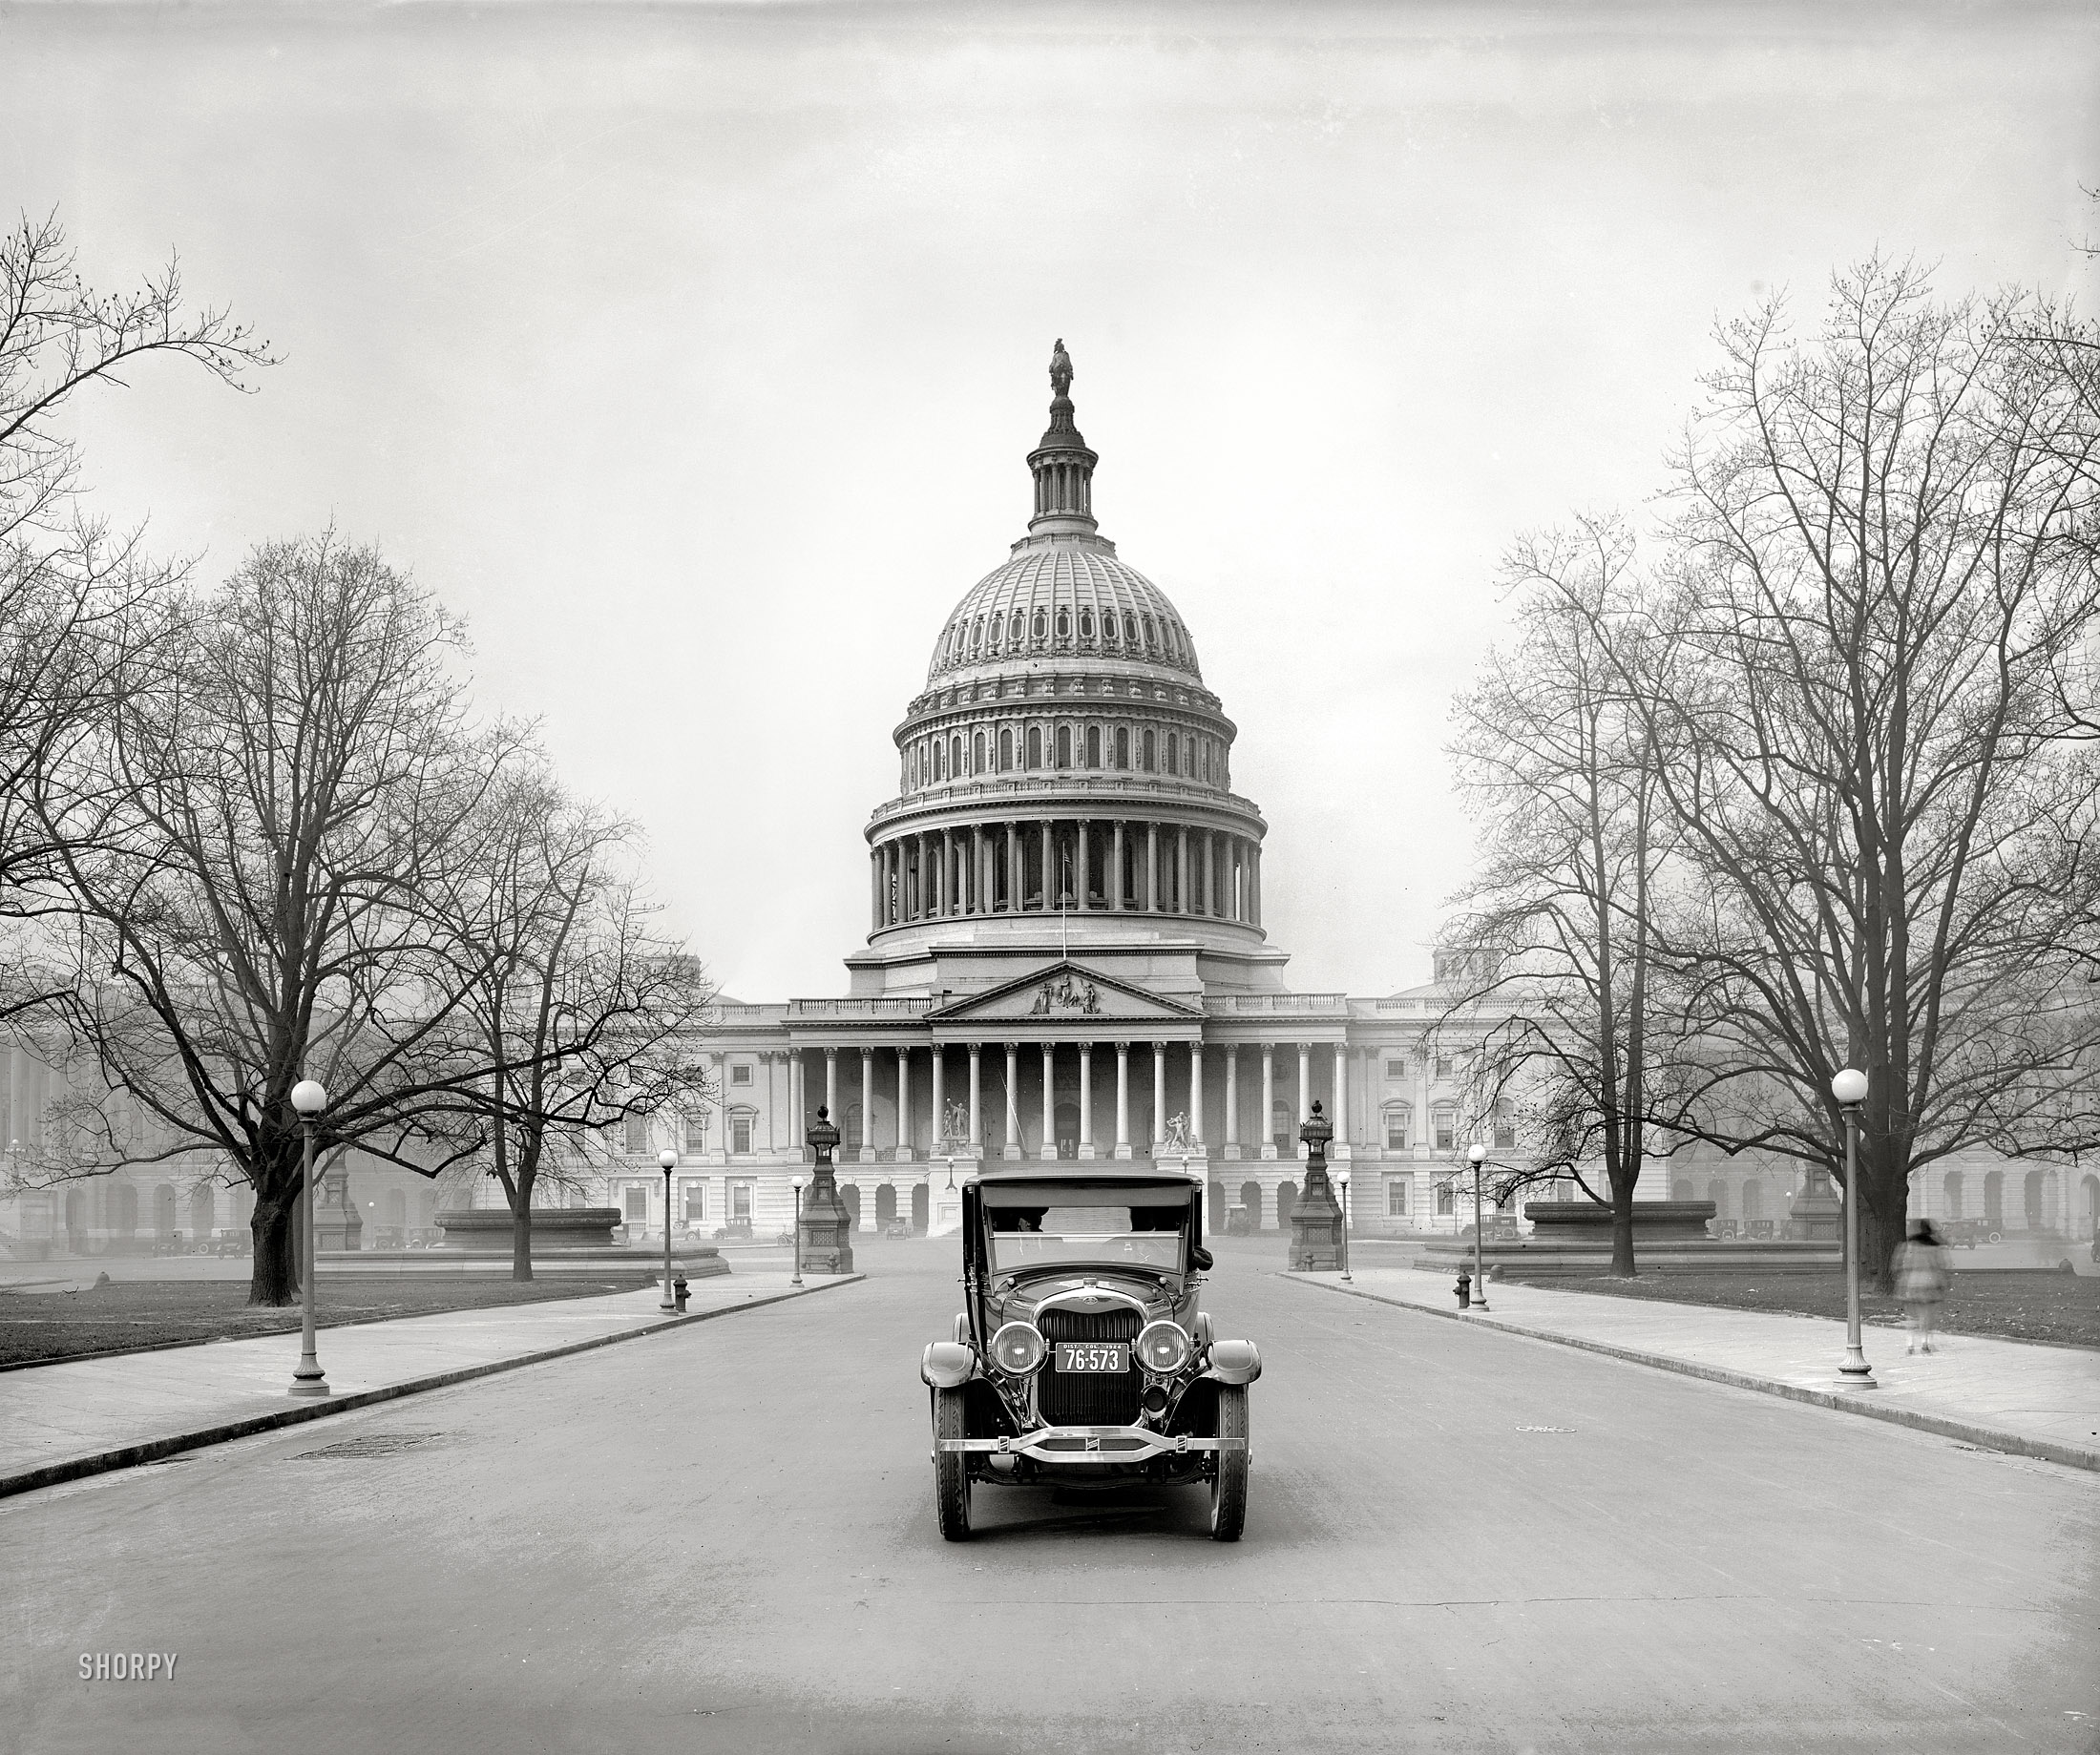 Washington, D.C., 1924. "Ford Motor Co. -- Lincoln at Capitol." The Great Transportator. National Photo Company glass negative. View full size.